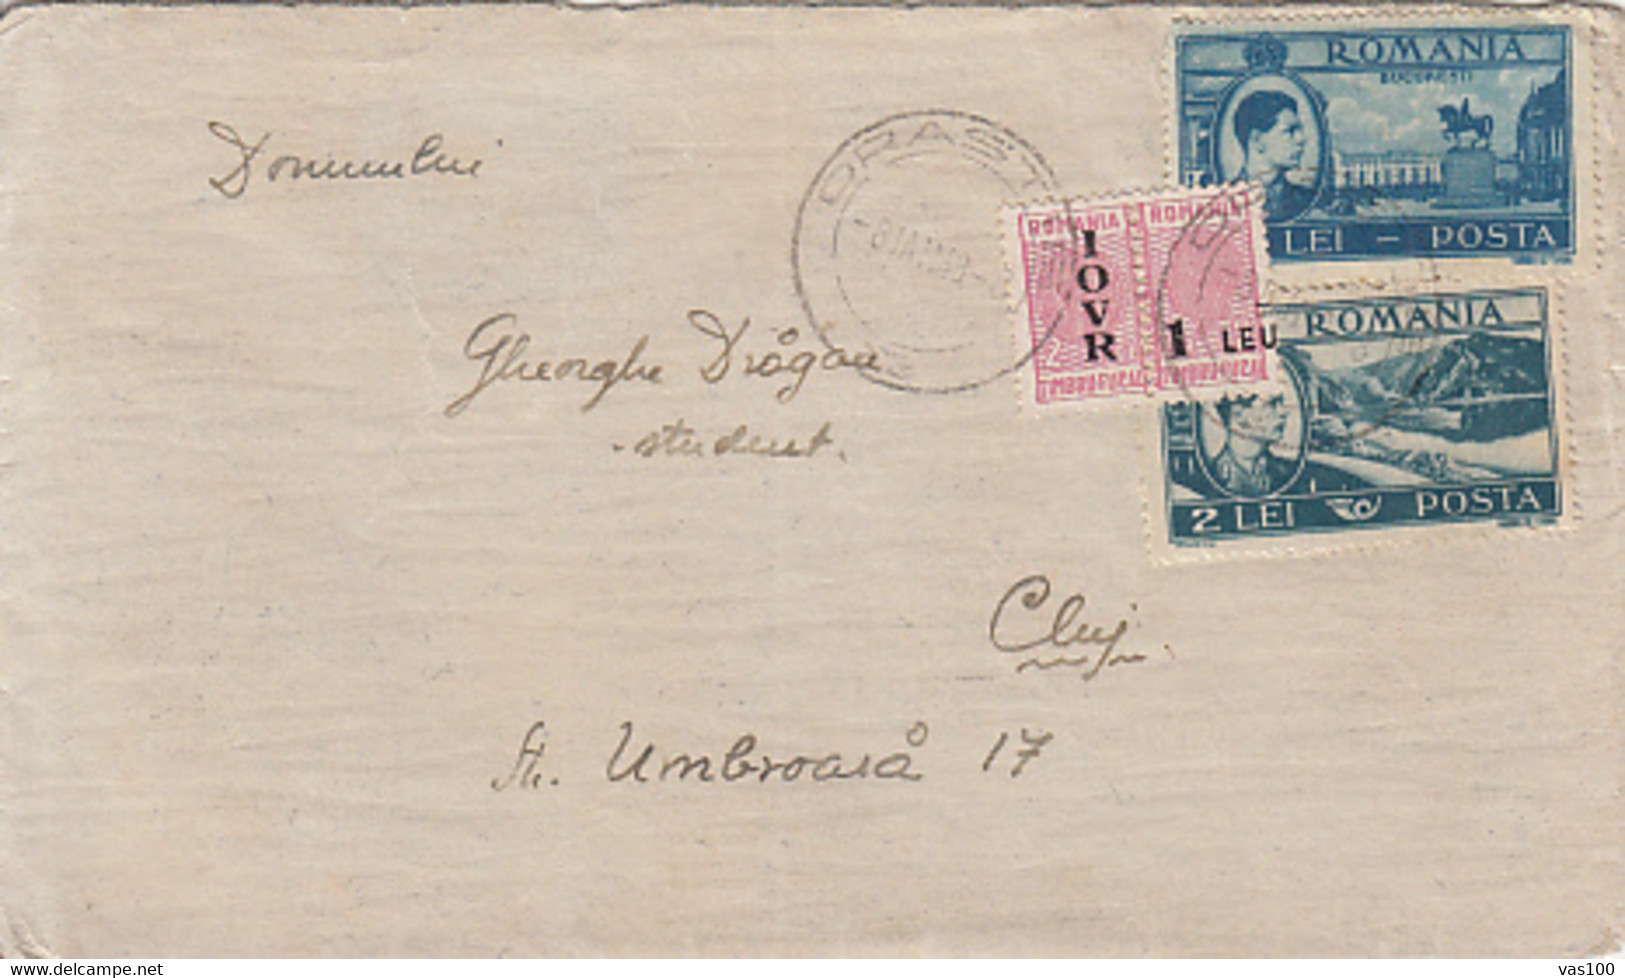 IOVR OVERPRINT REVENUE STAMP, KING MICHAEL, DANUBE, SHIP, BUCHAREST STATUE STAMPS ON COVER, 1948, ROMANIA - Revenue Stamps